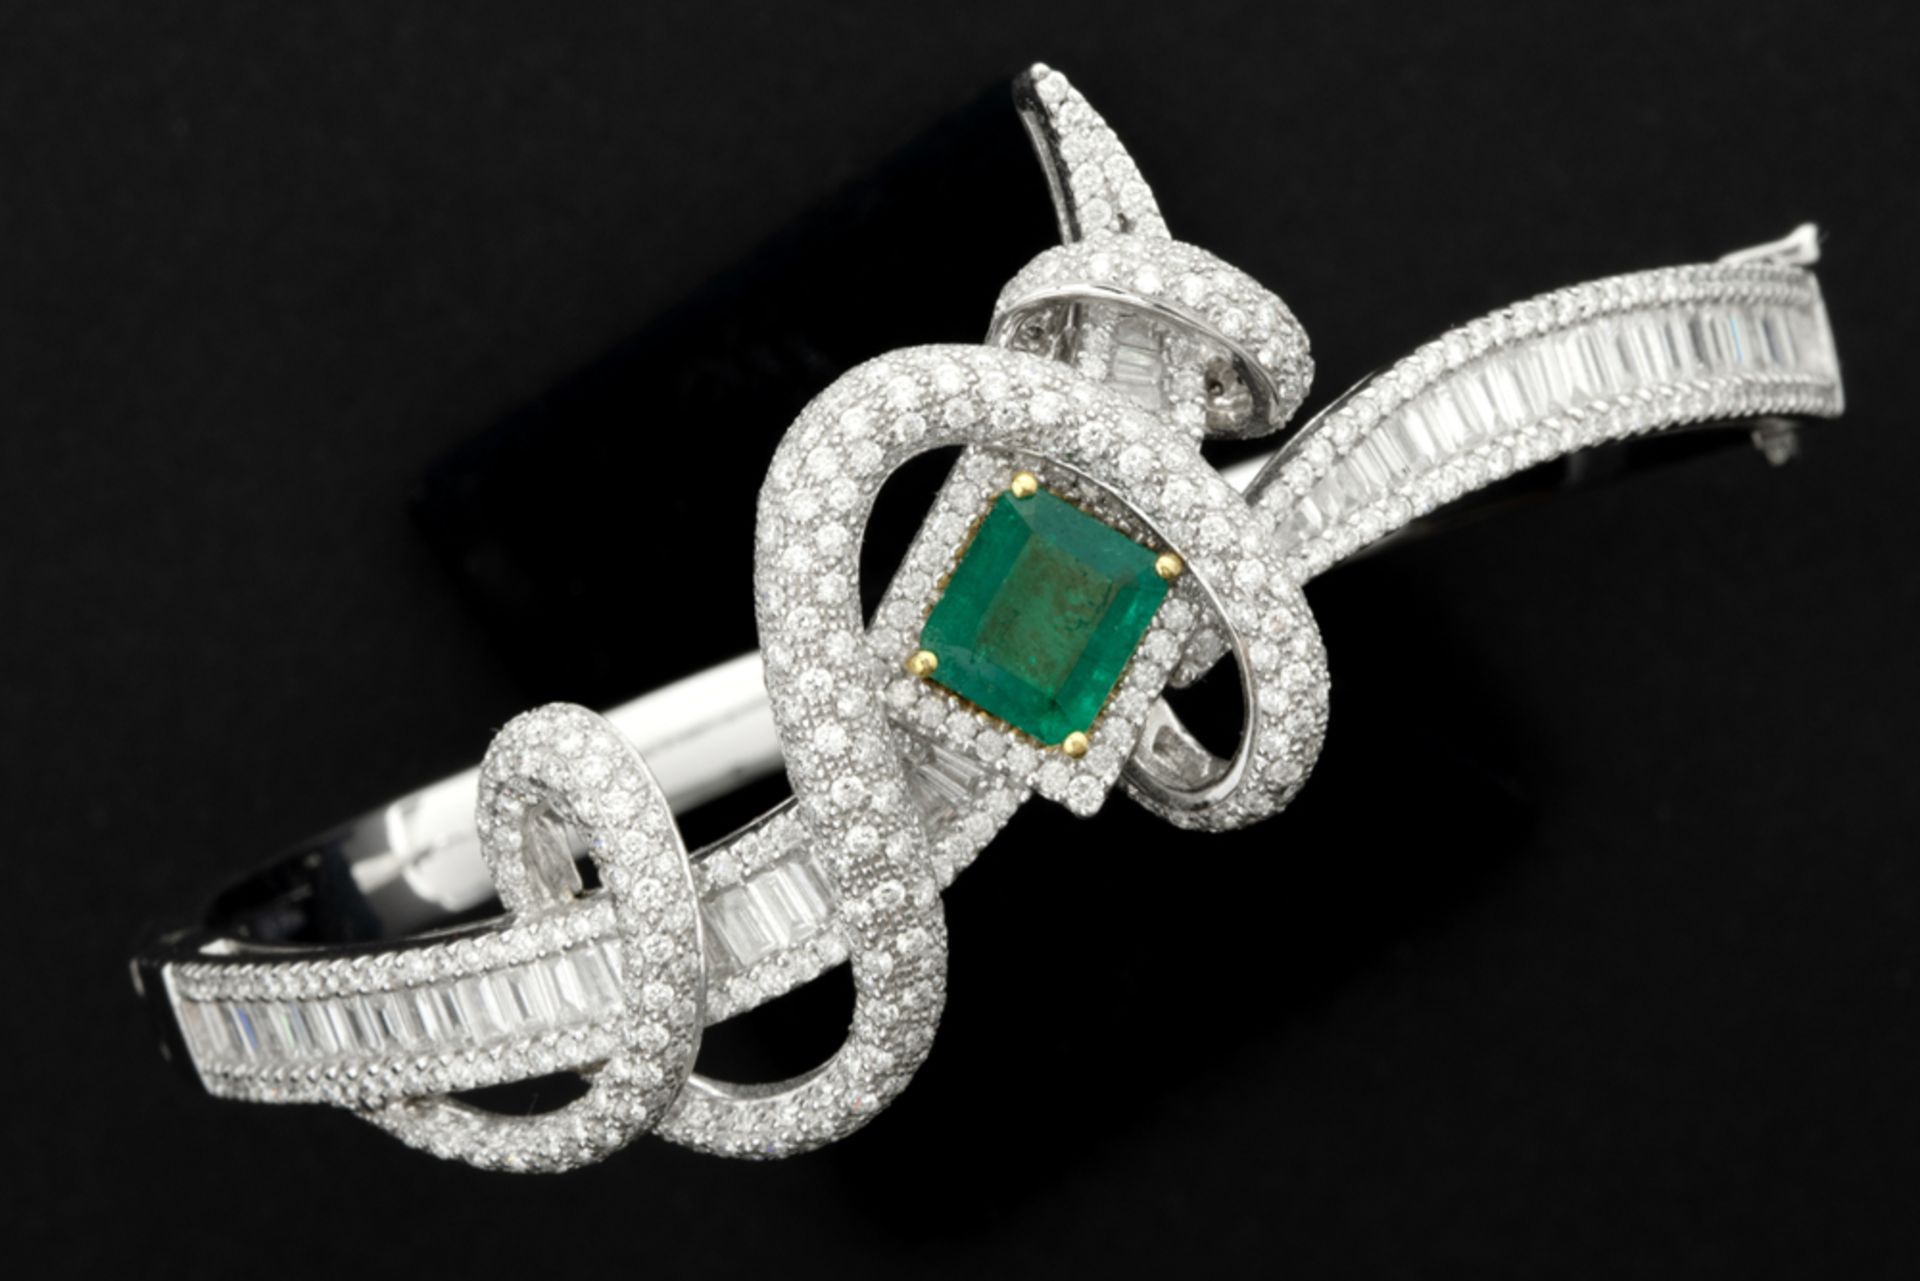 matching elegant bracelet in white gold (18 carat) with a ca 2,50 carat emerald and ca 4,50 carat of